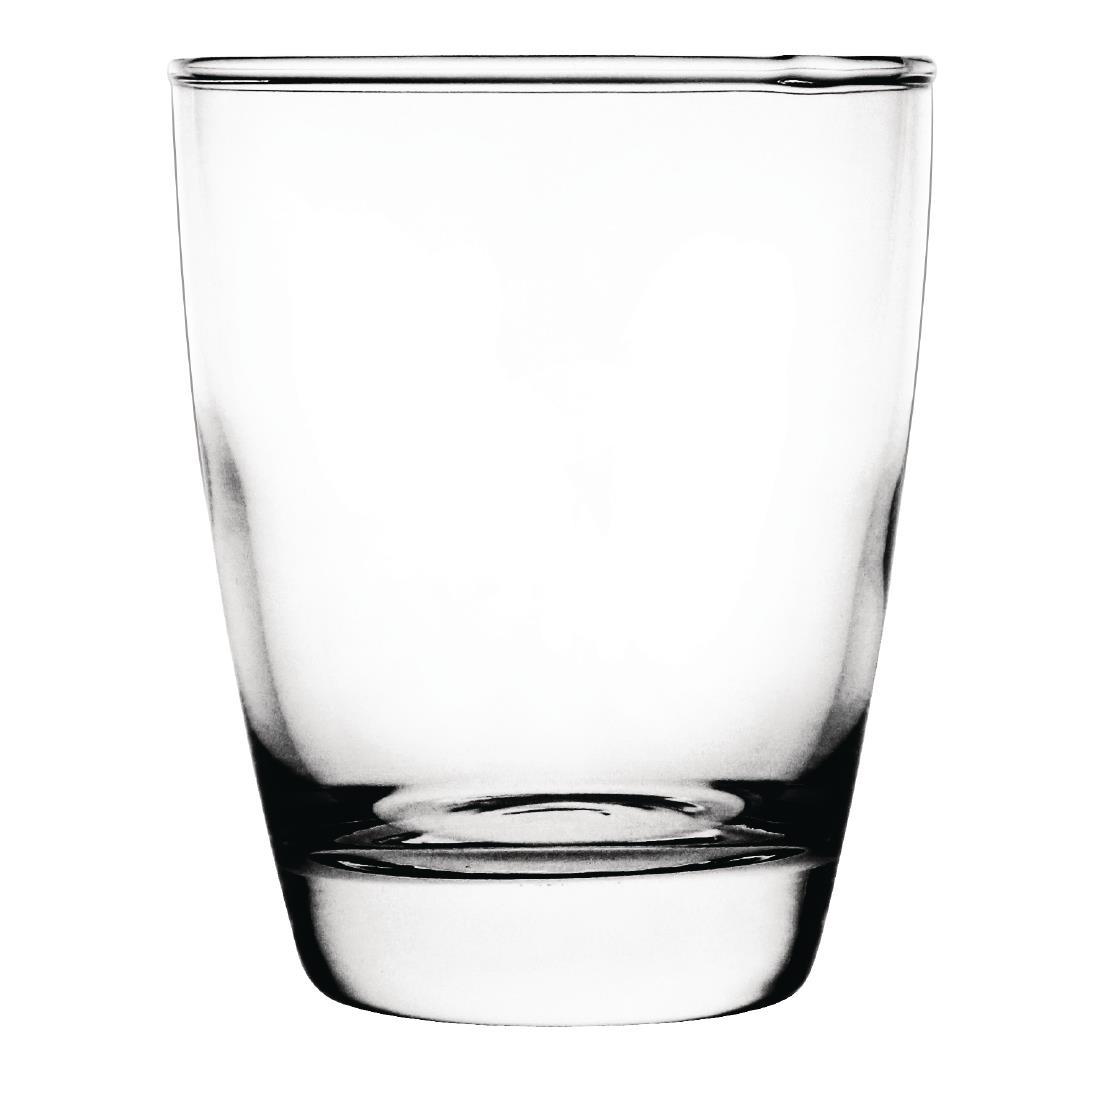 Olympia Conical Rocks Glasses 268ml (Pack of 12) - GM572  - 1